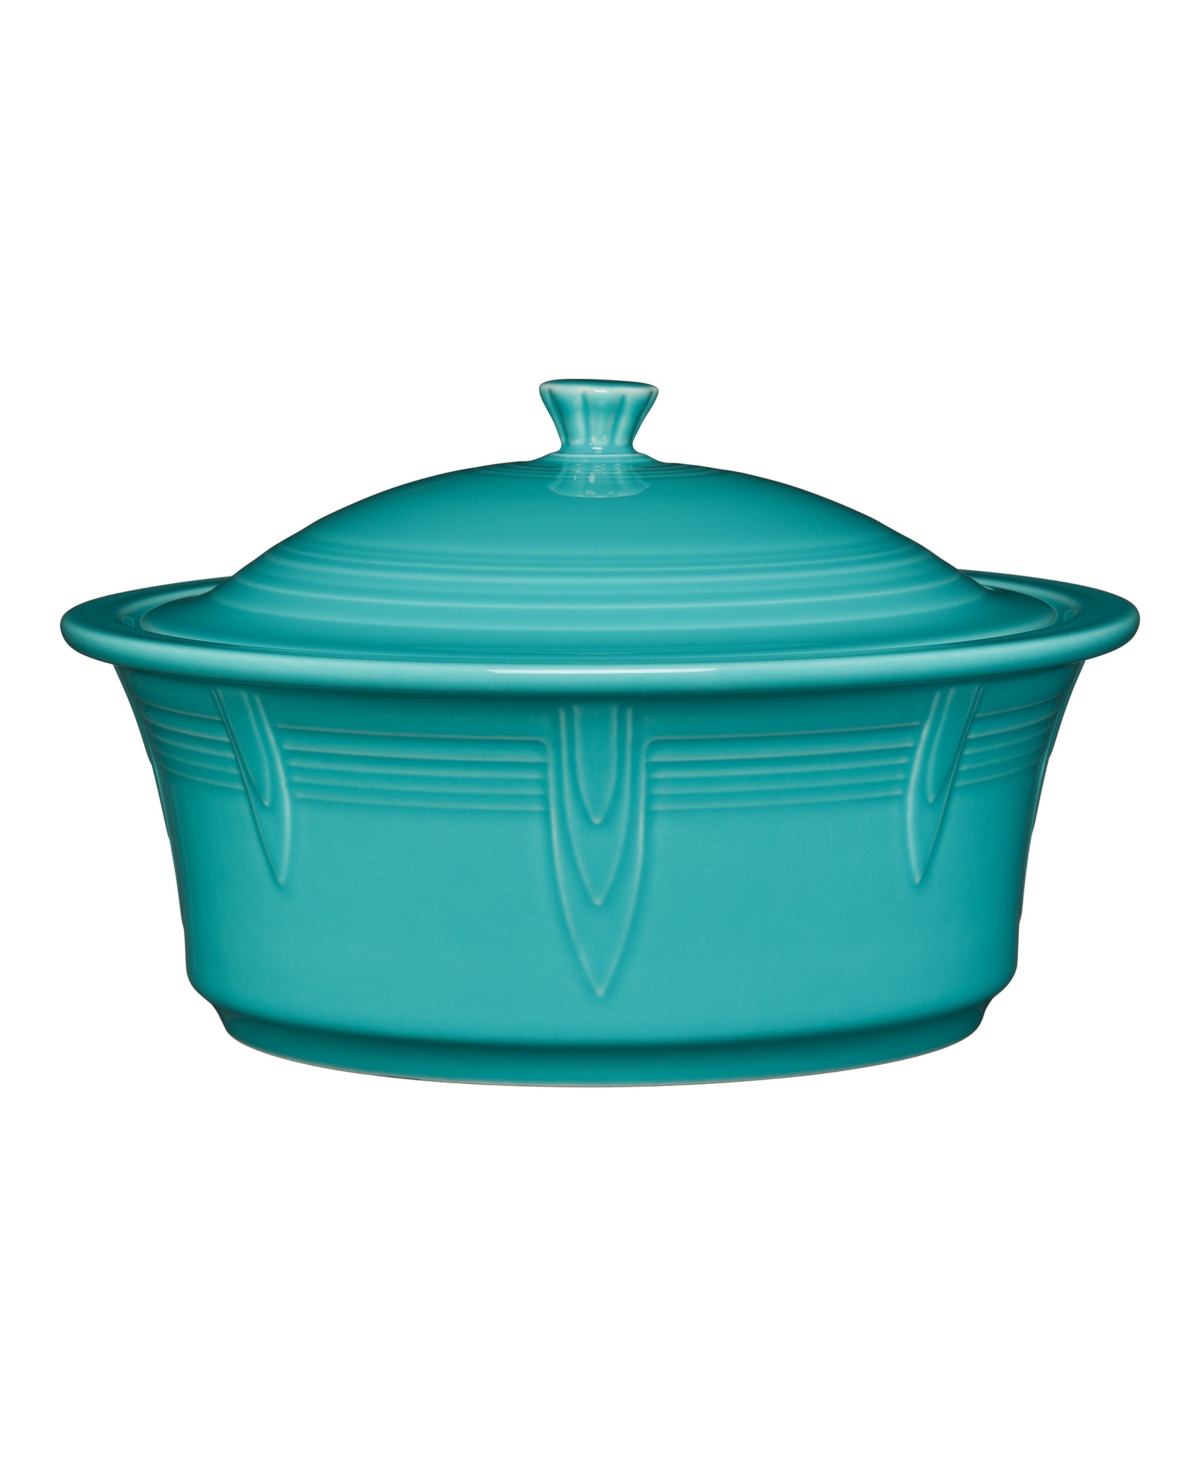 Fiesta Large Covered Casserole 90 Oz. In Turquoise